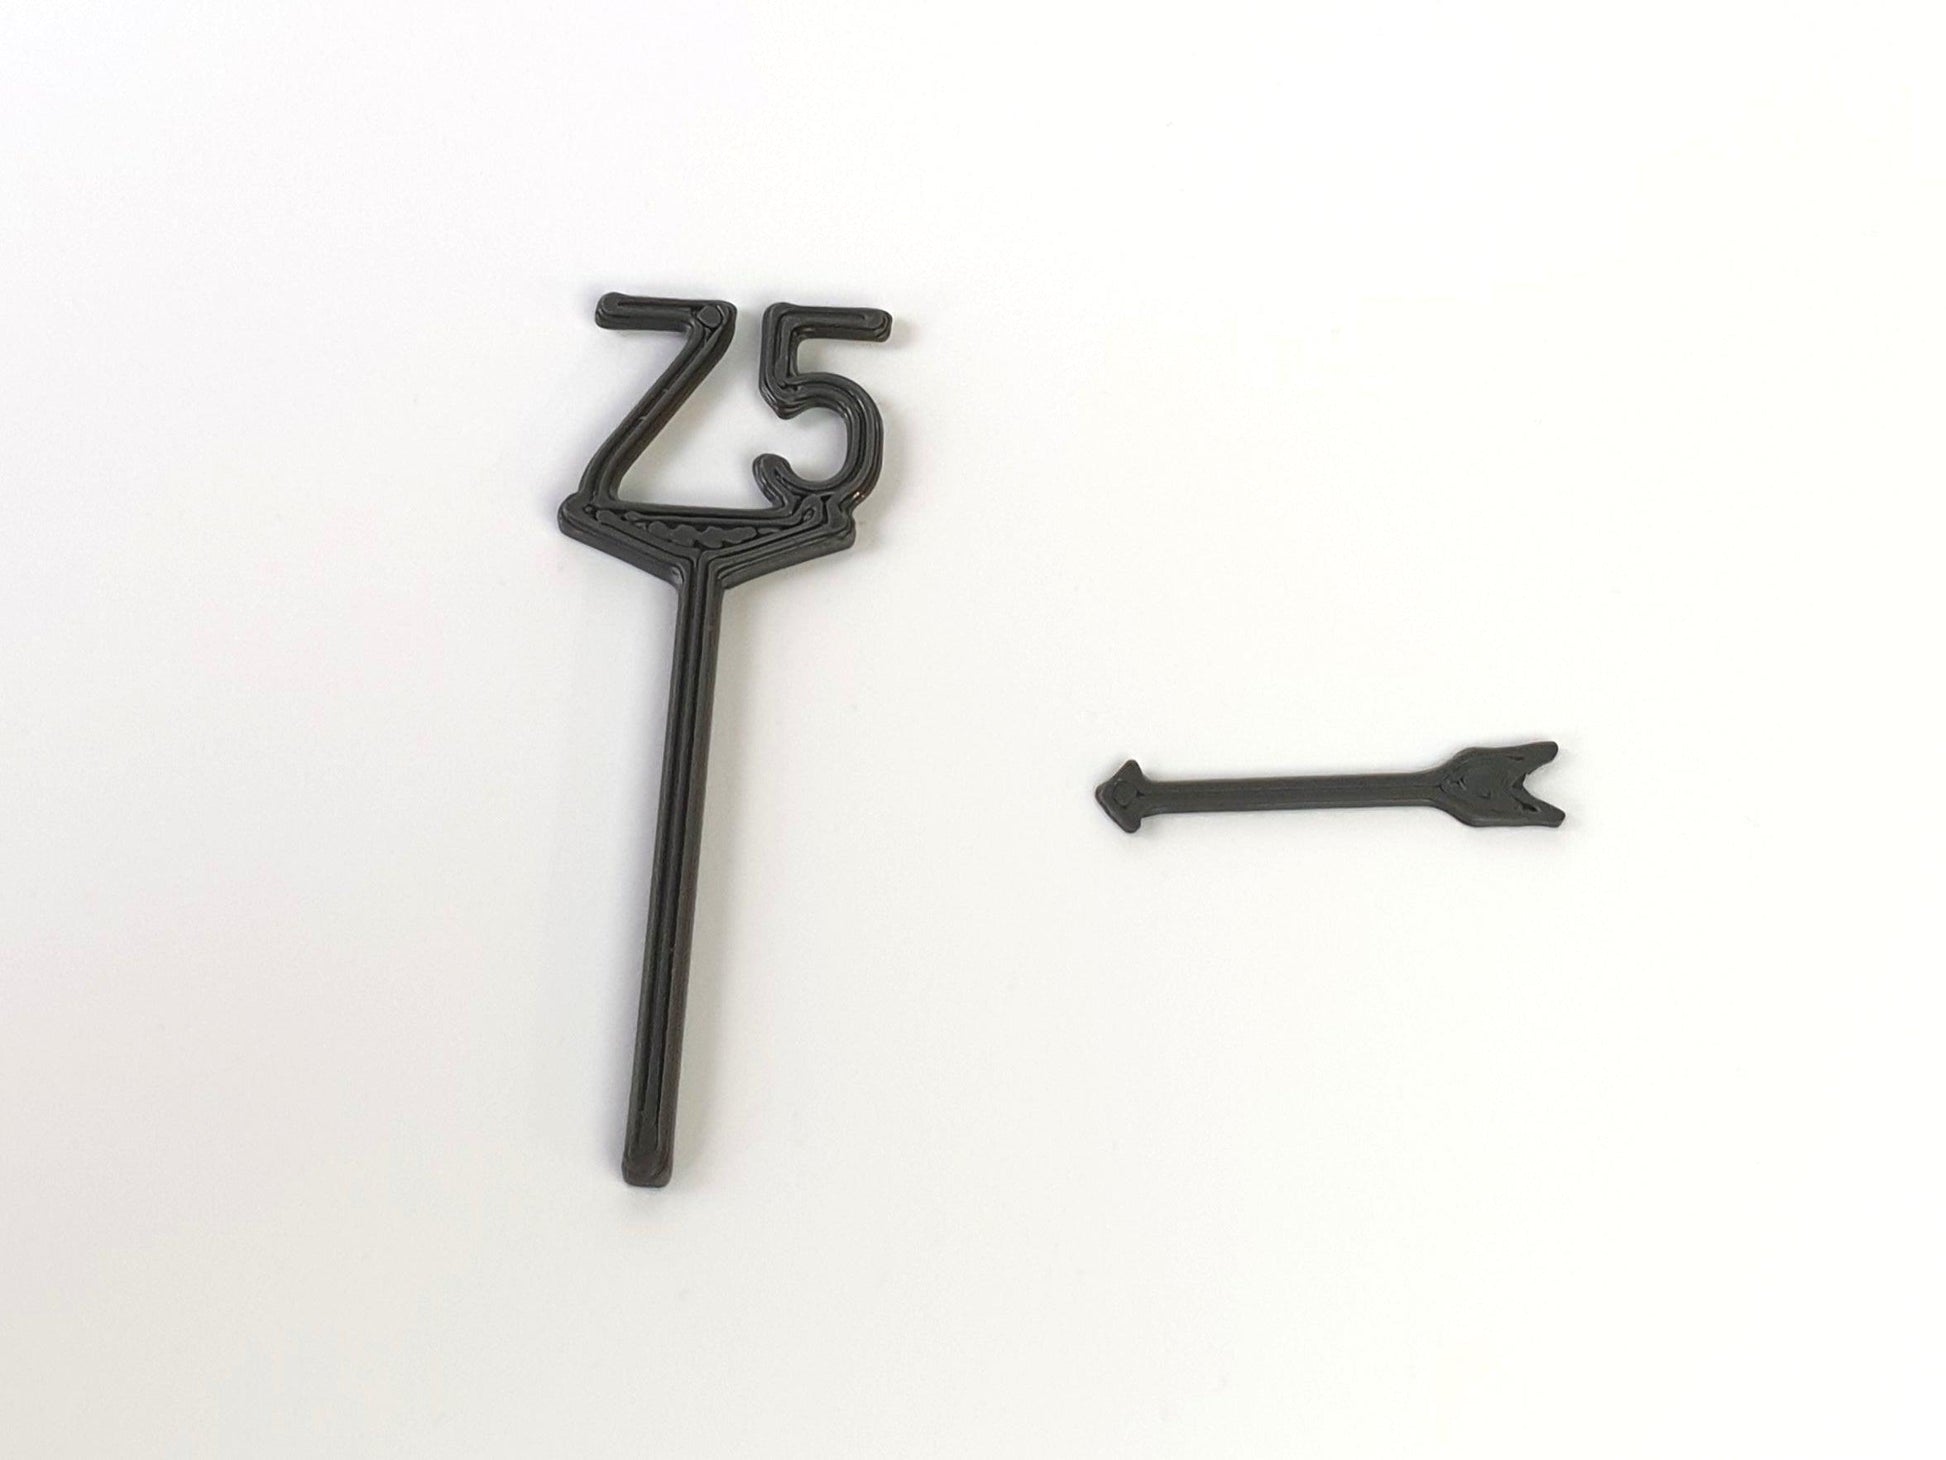 75 mph O gauge scale model BR speed limit sign with separate directional arrow - Three Peaks Models